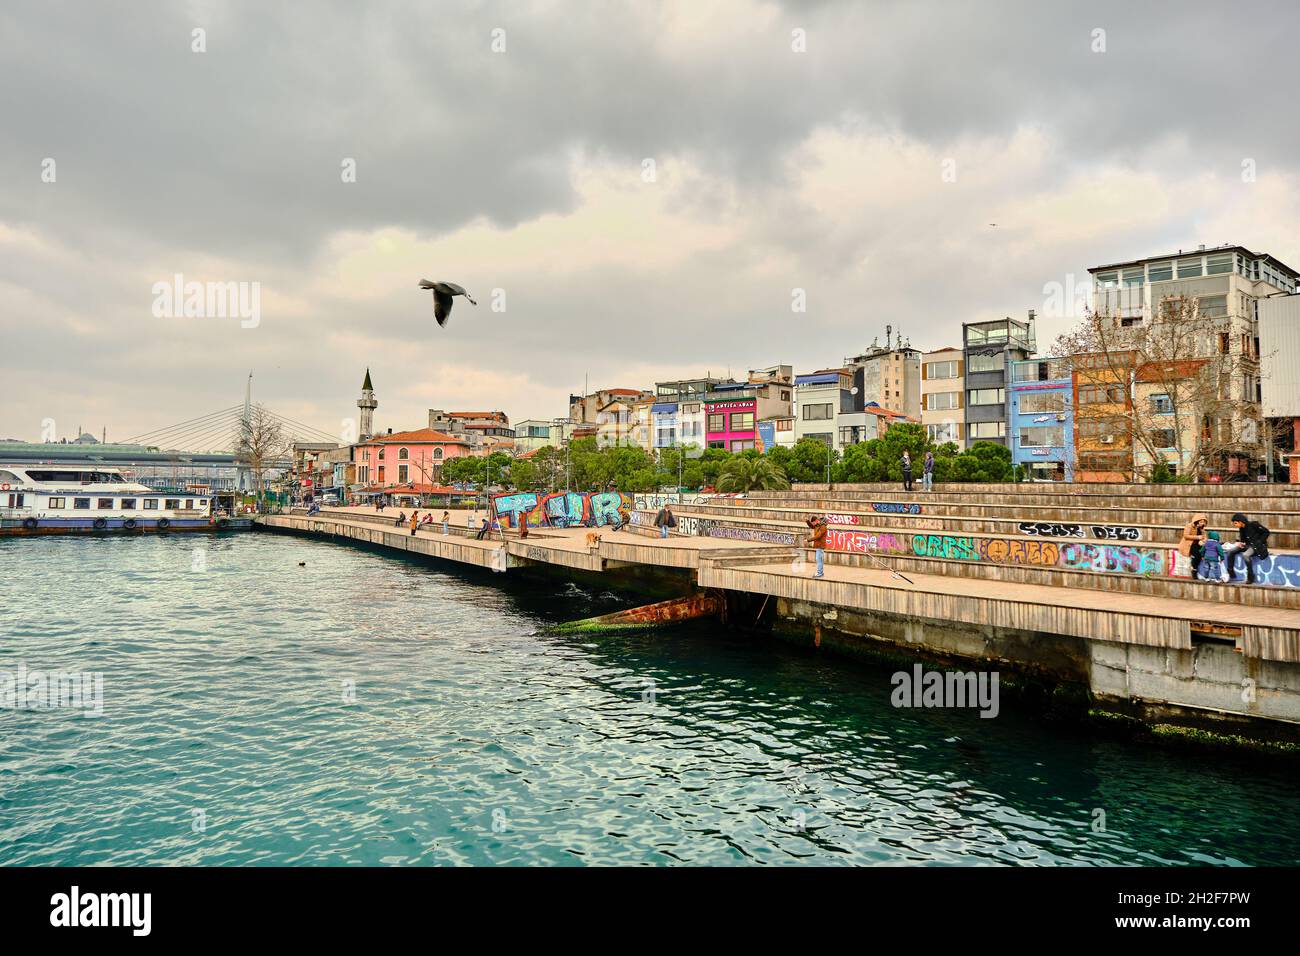 Karakoy shore and colorful painting on seating area and a man waiting for fishing with rod in istanbul golden horn and bosphorus and young couples Stock Photo